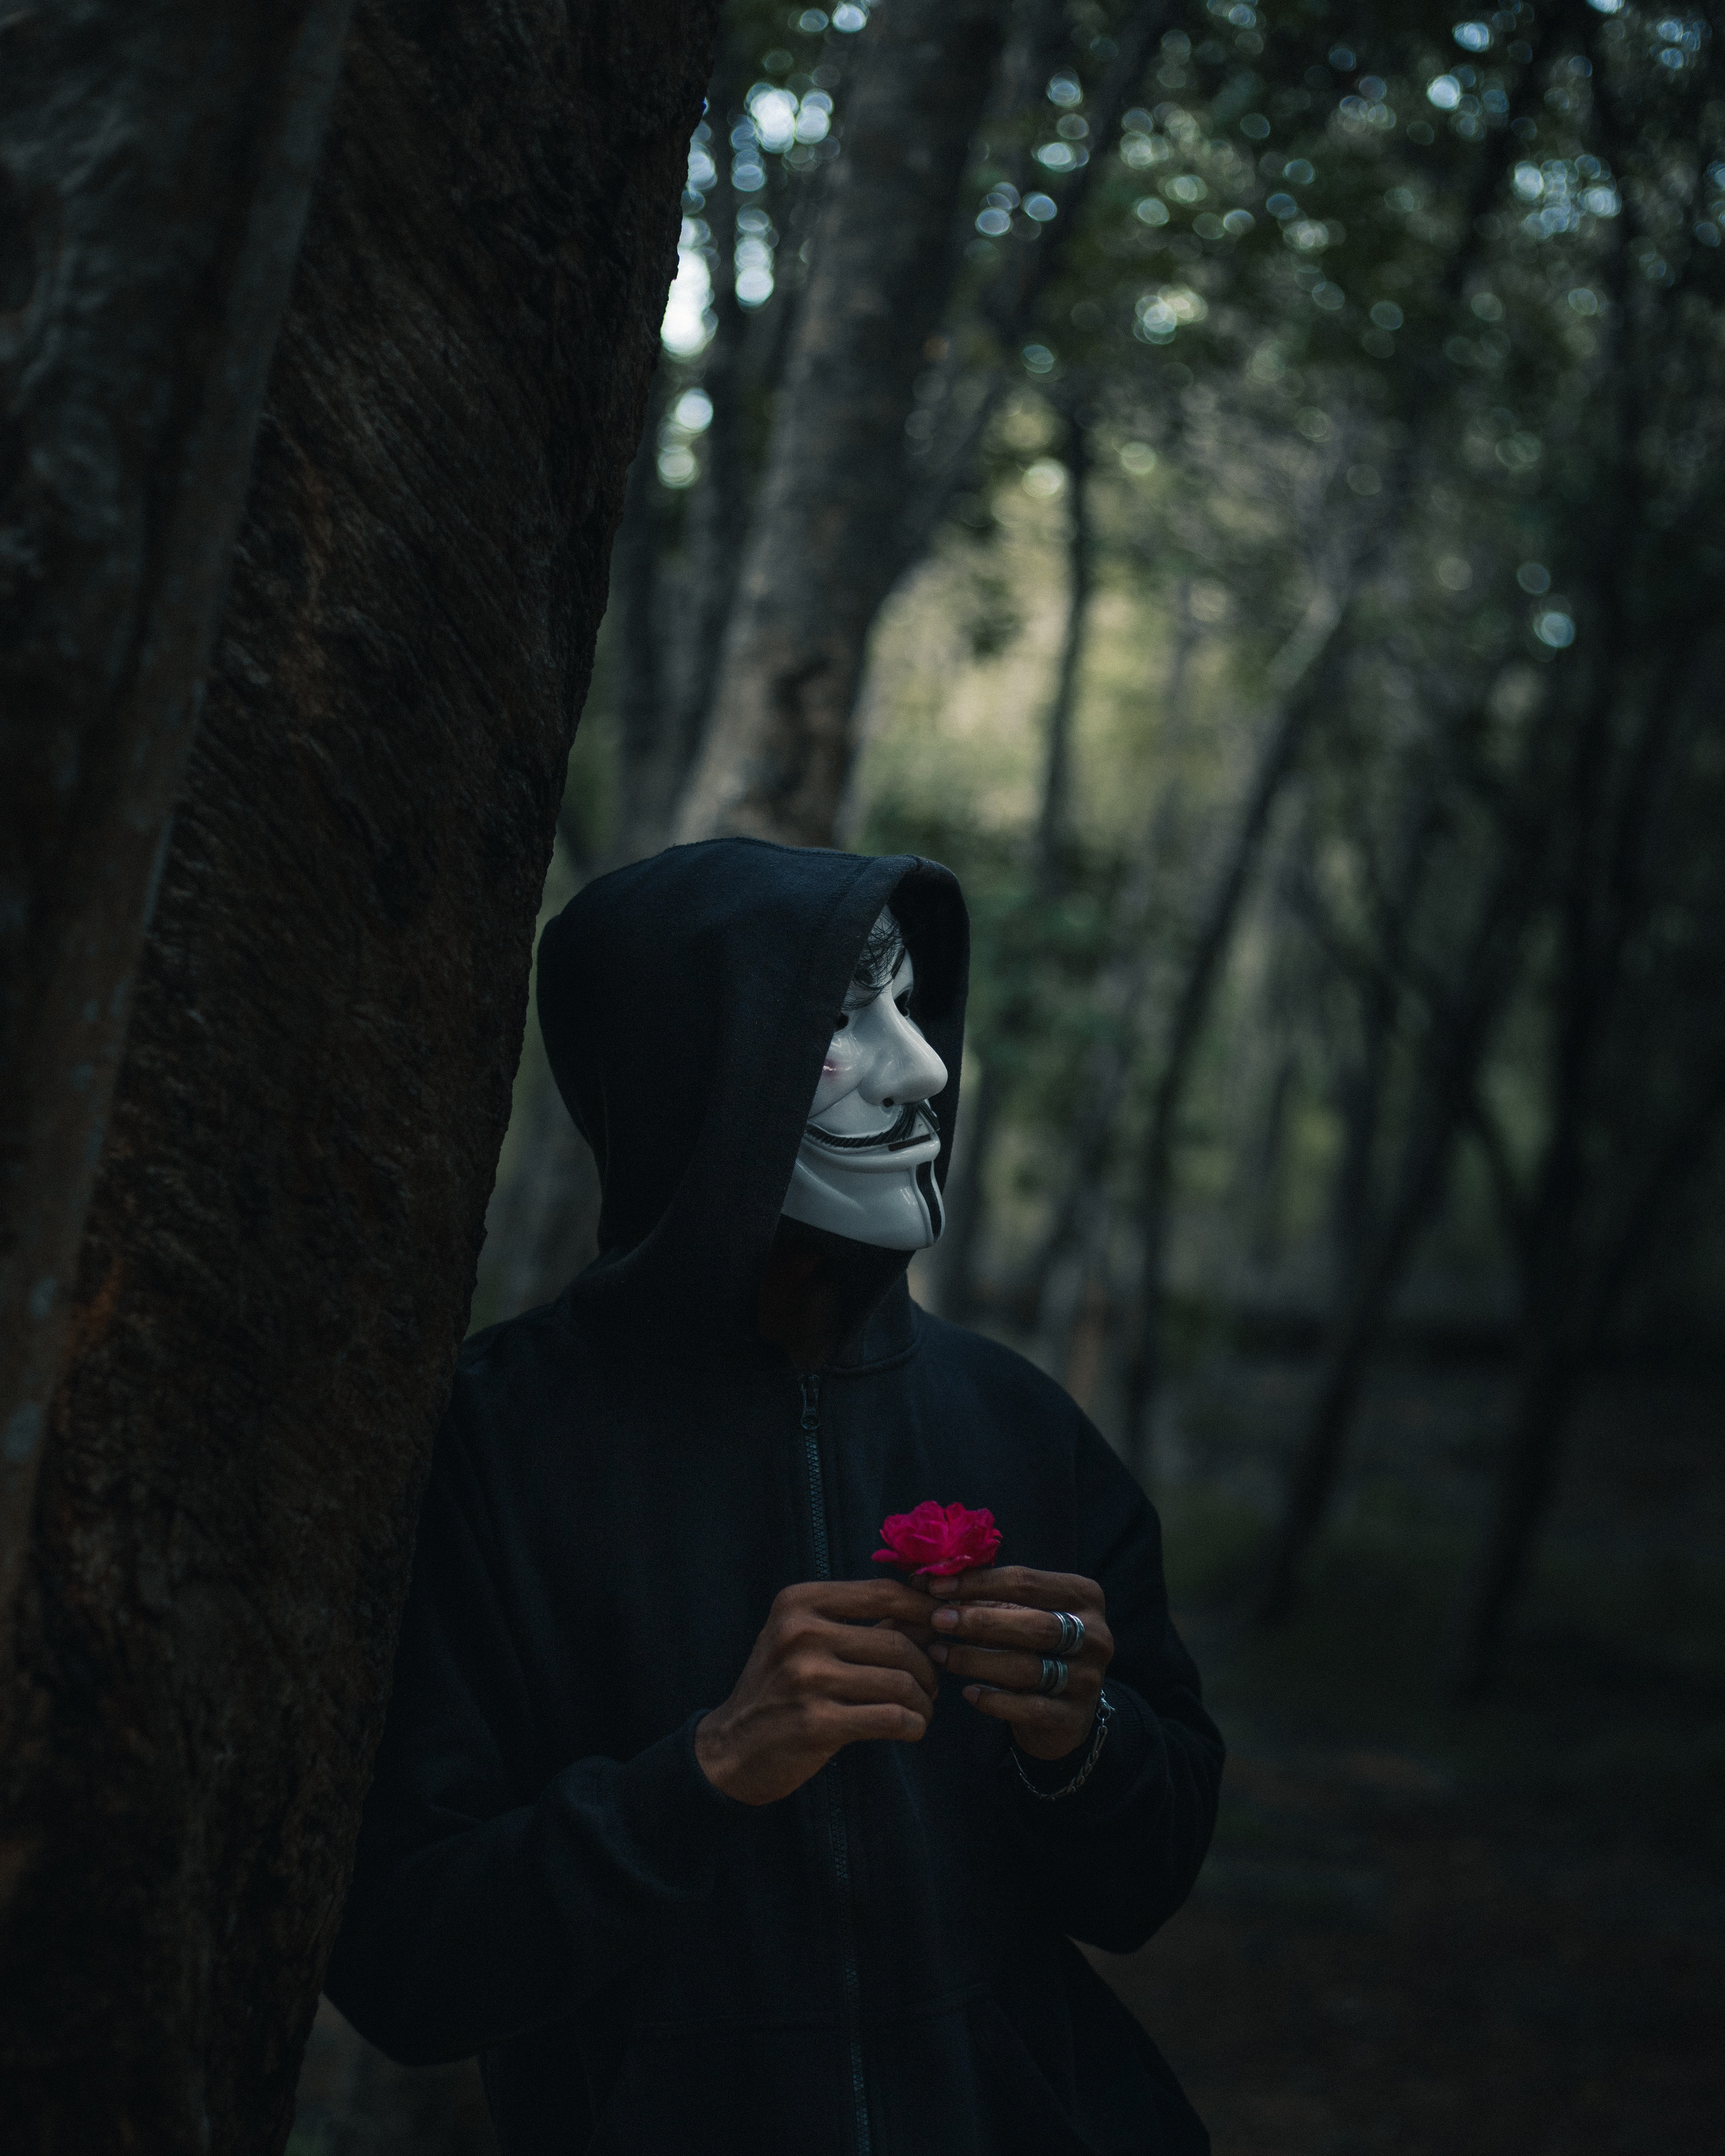 60715 download wallpaper anonymous, miscellanea, miscellaneous, forest, mask, human, person, hood screensavers and pictures for free